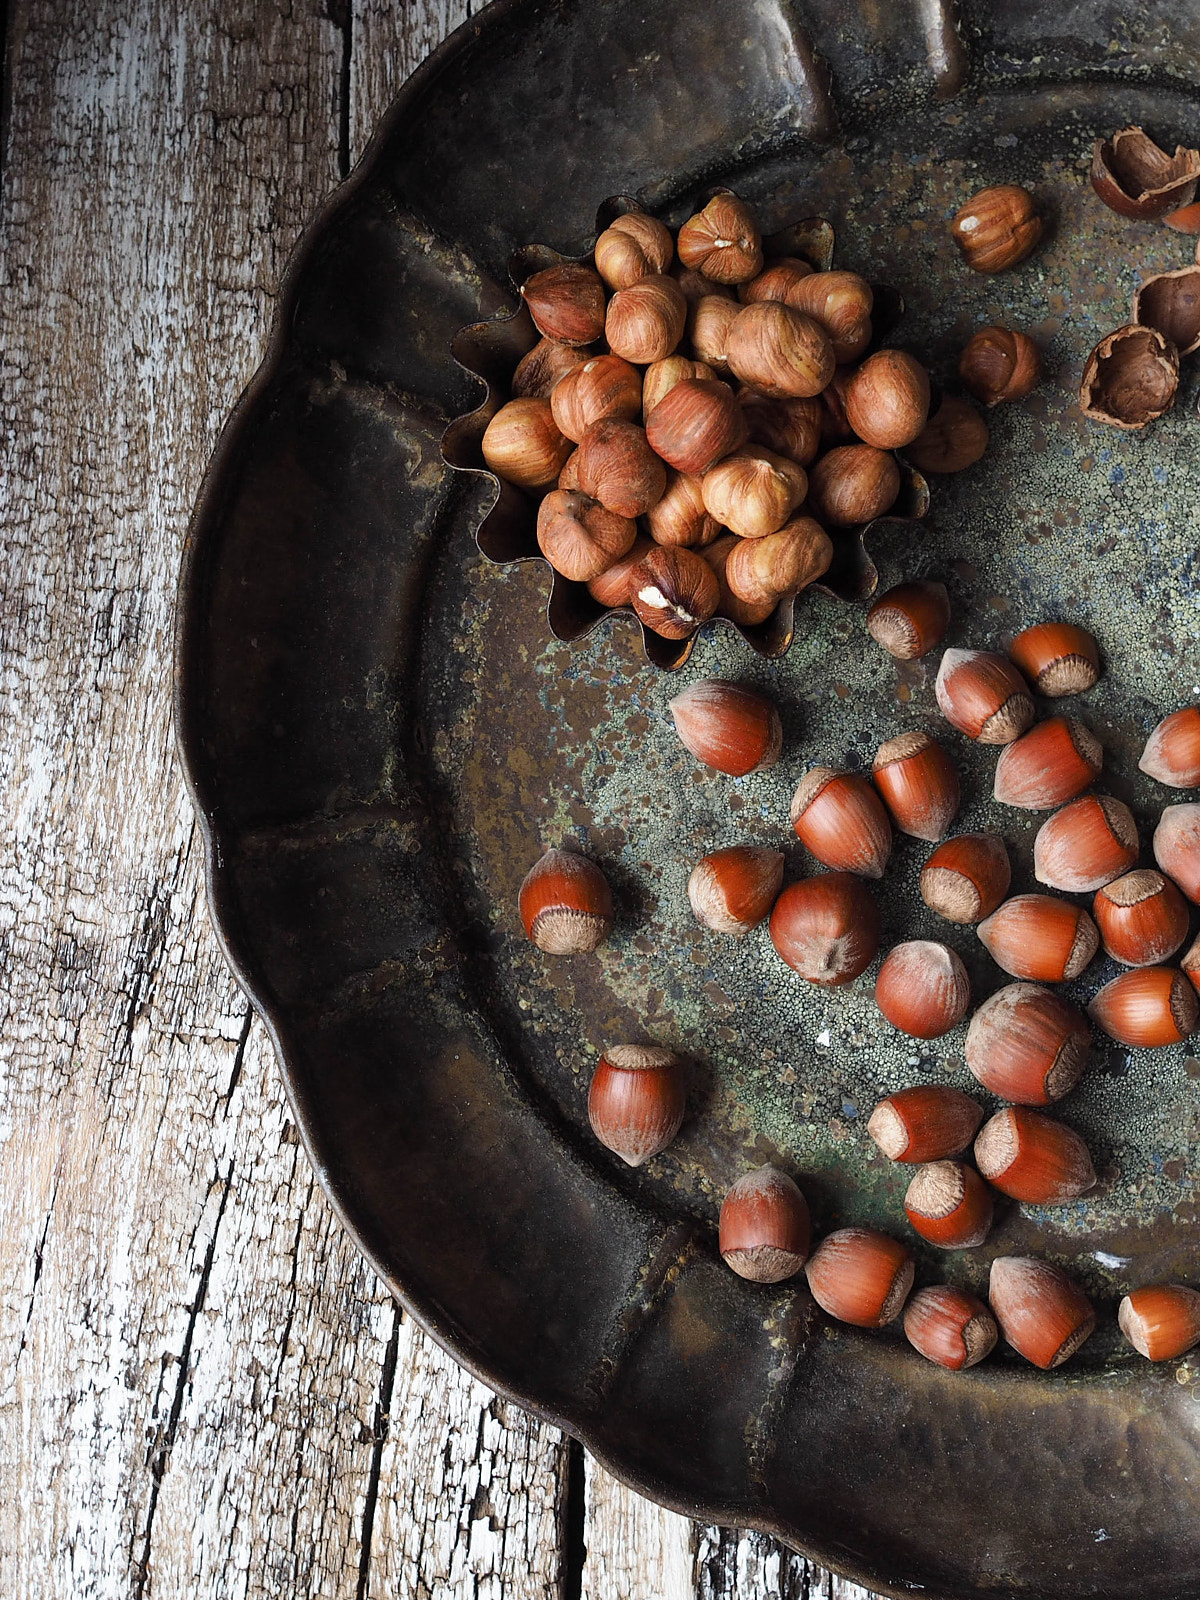 Olympus OM-D E-M10 + Sigma 19mm F2.8 DN Art sample photo. Hazelnuts scattered on an old metal platter and to photography